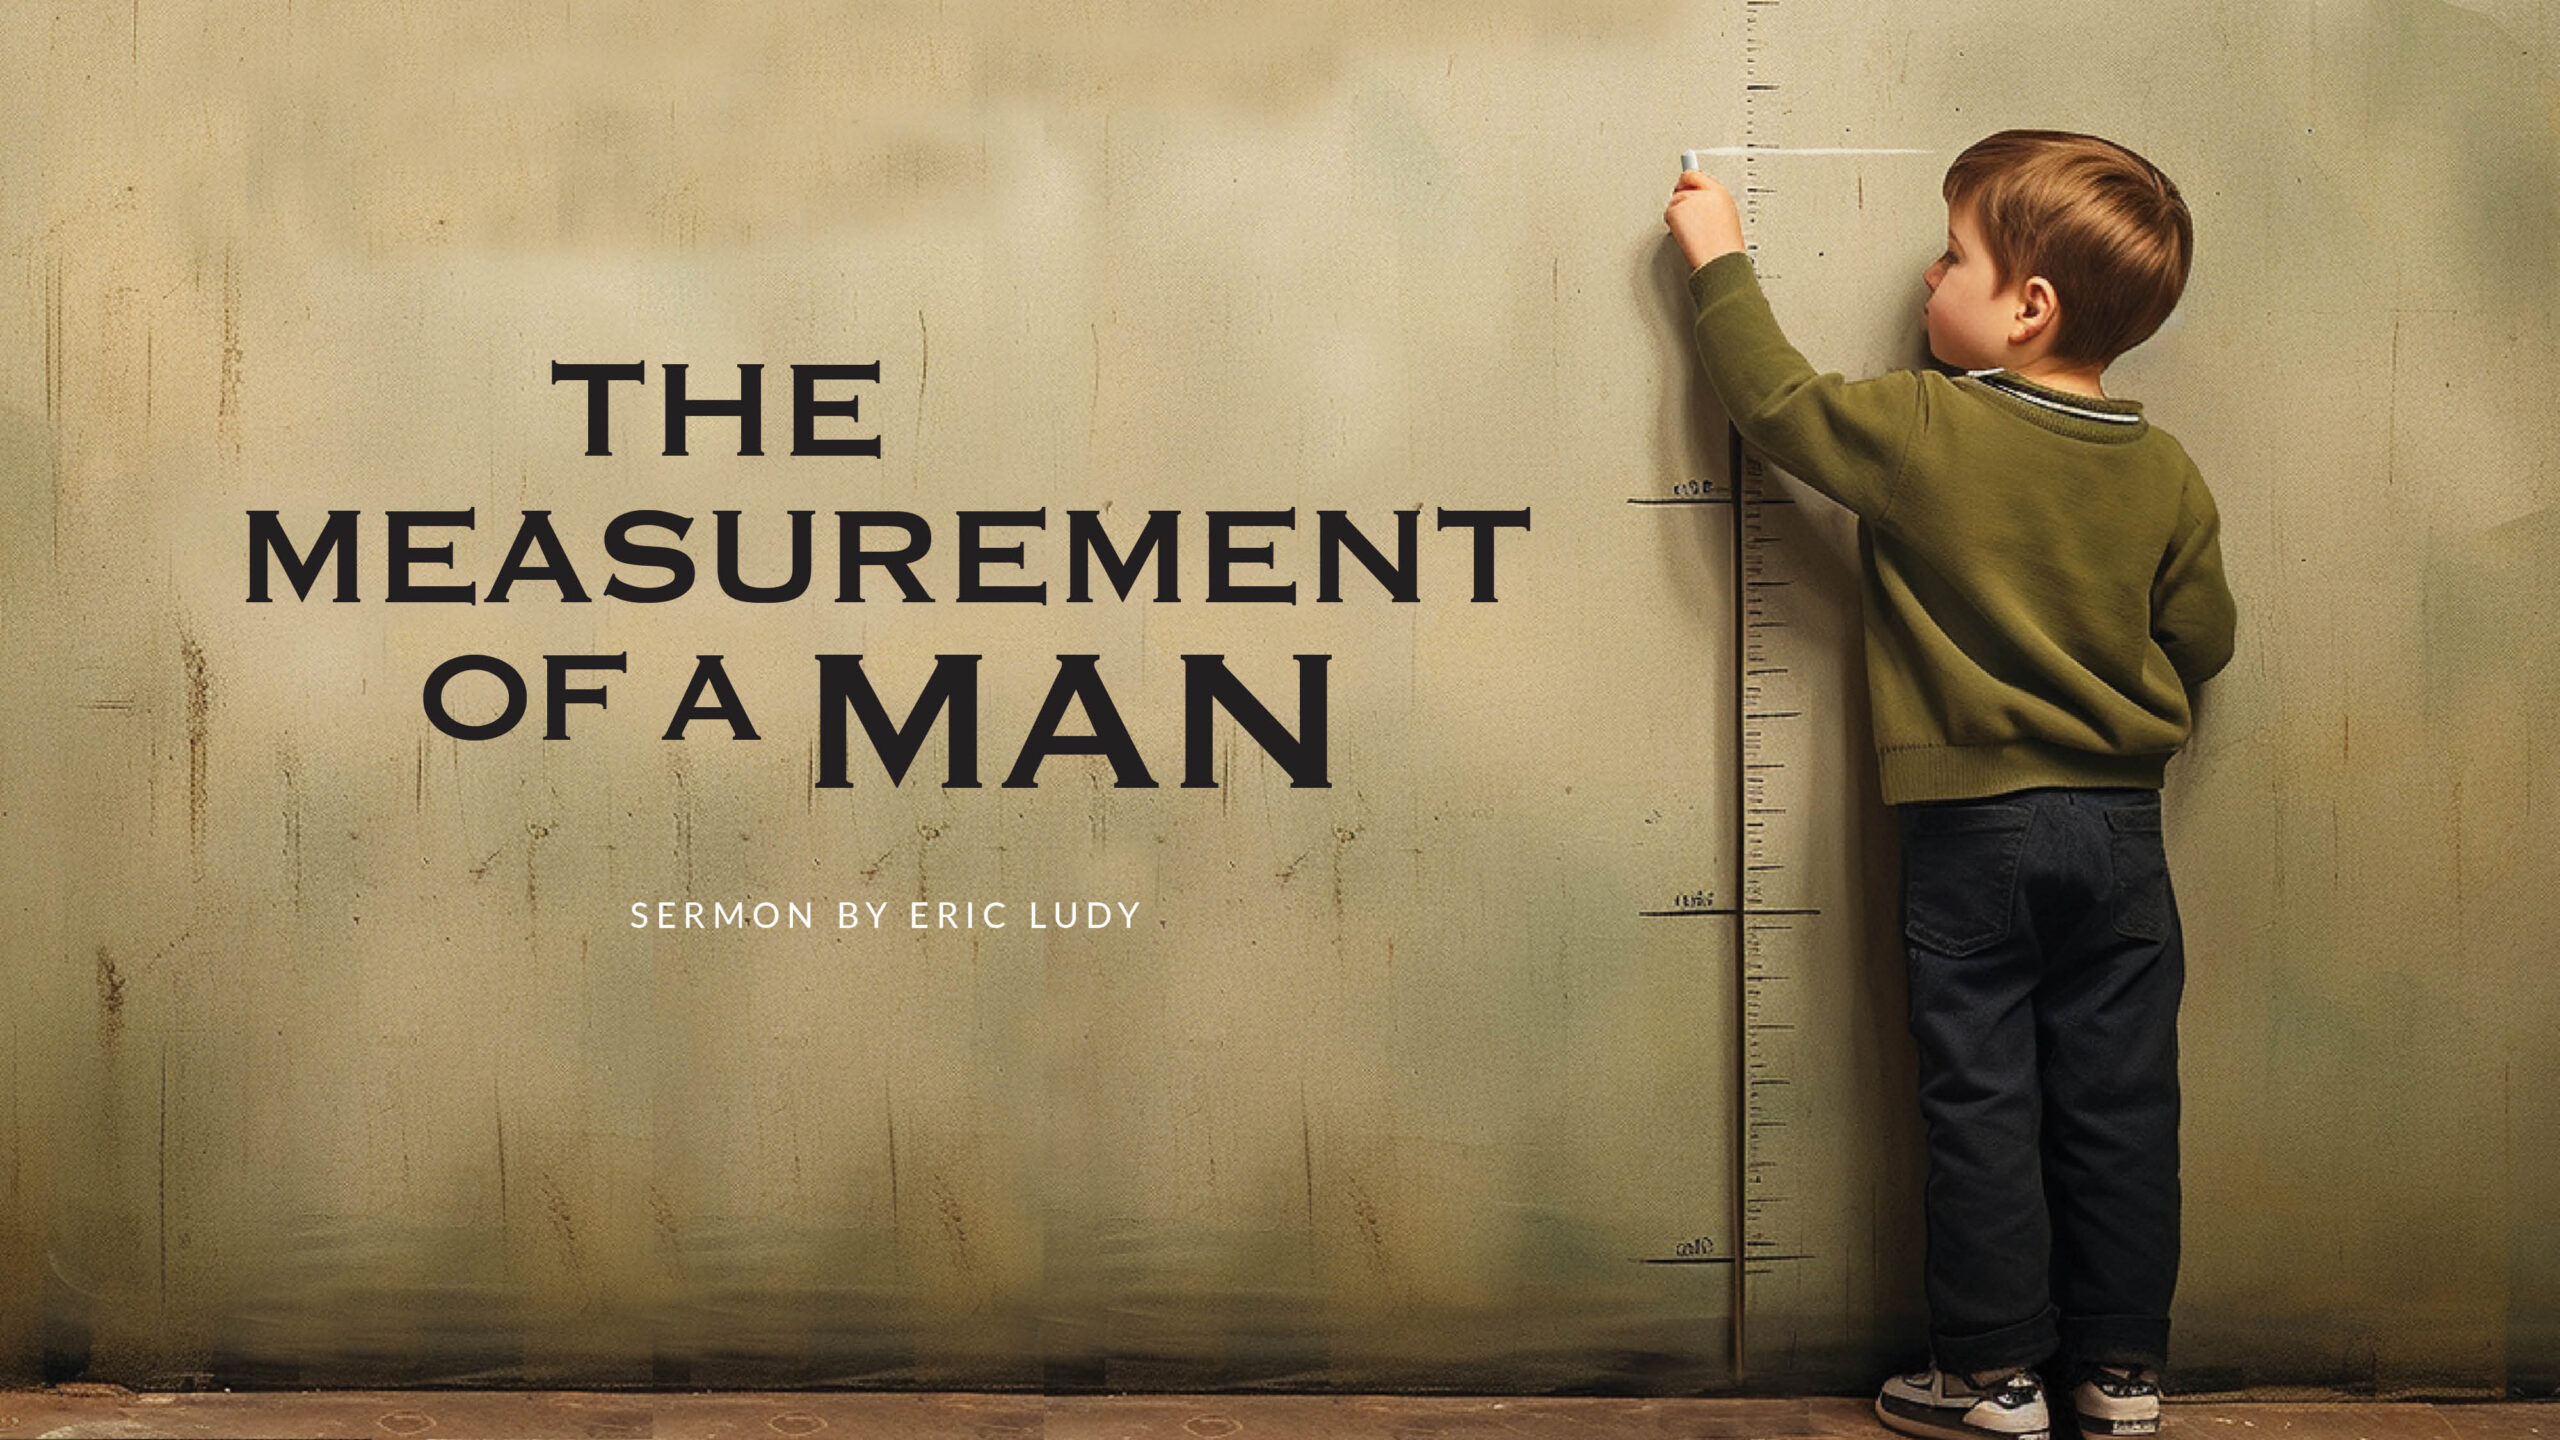 The Measurement of a Man